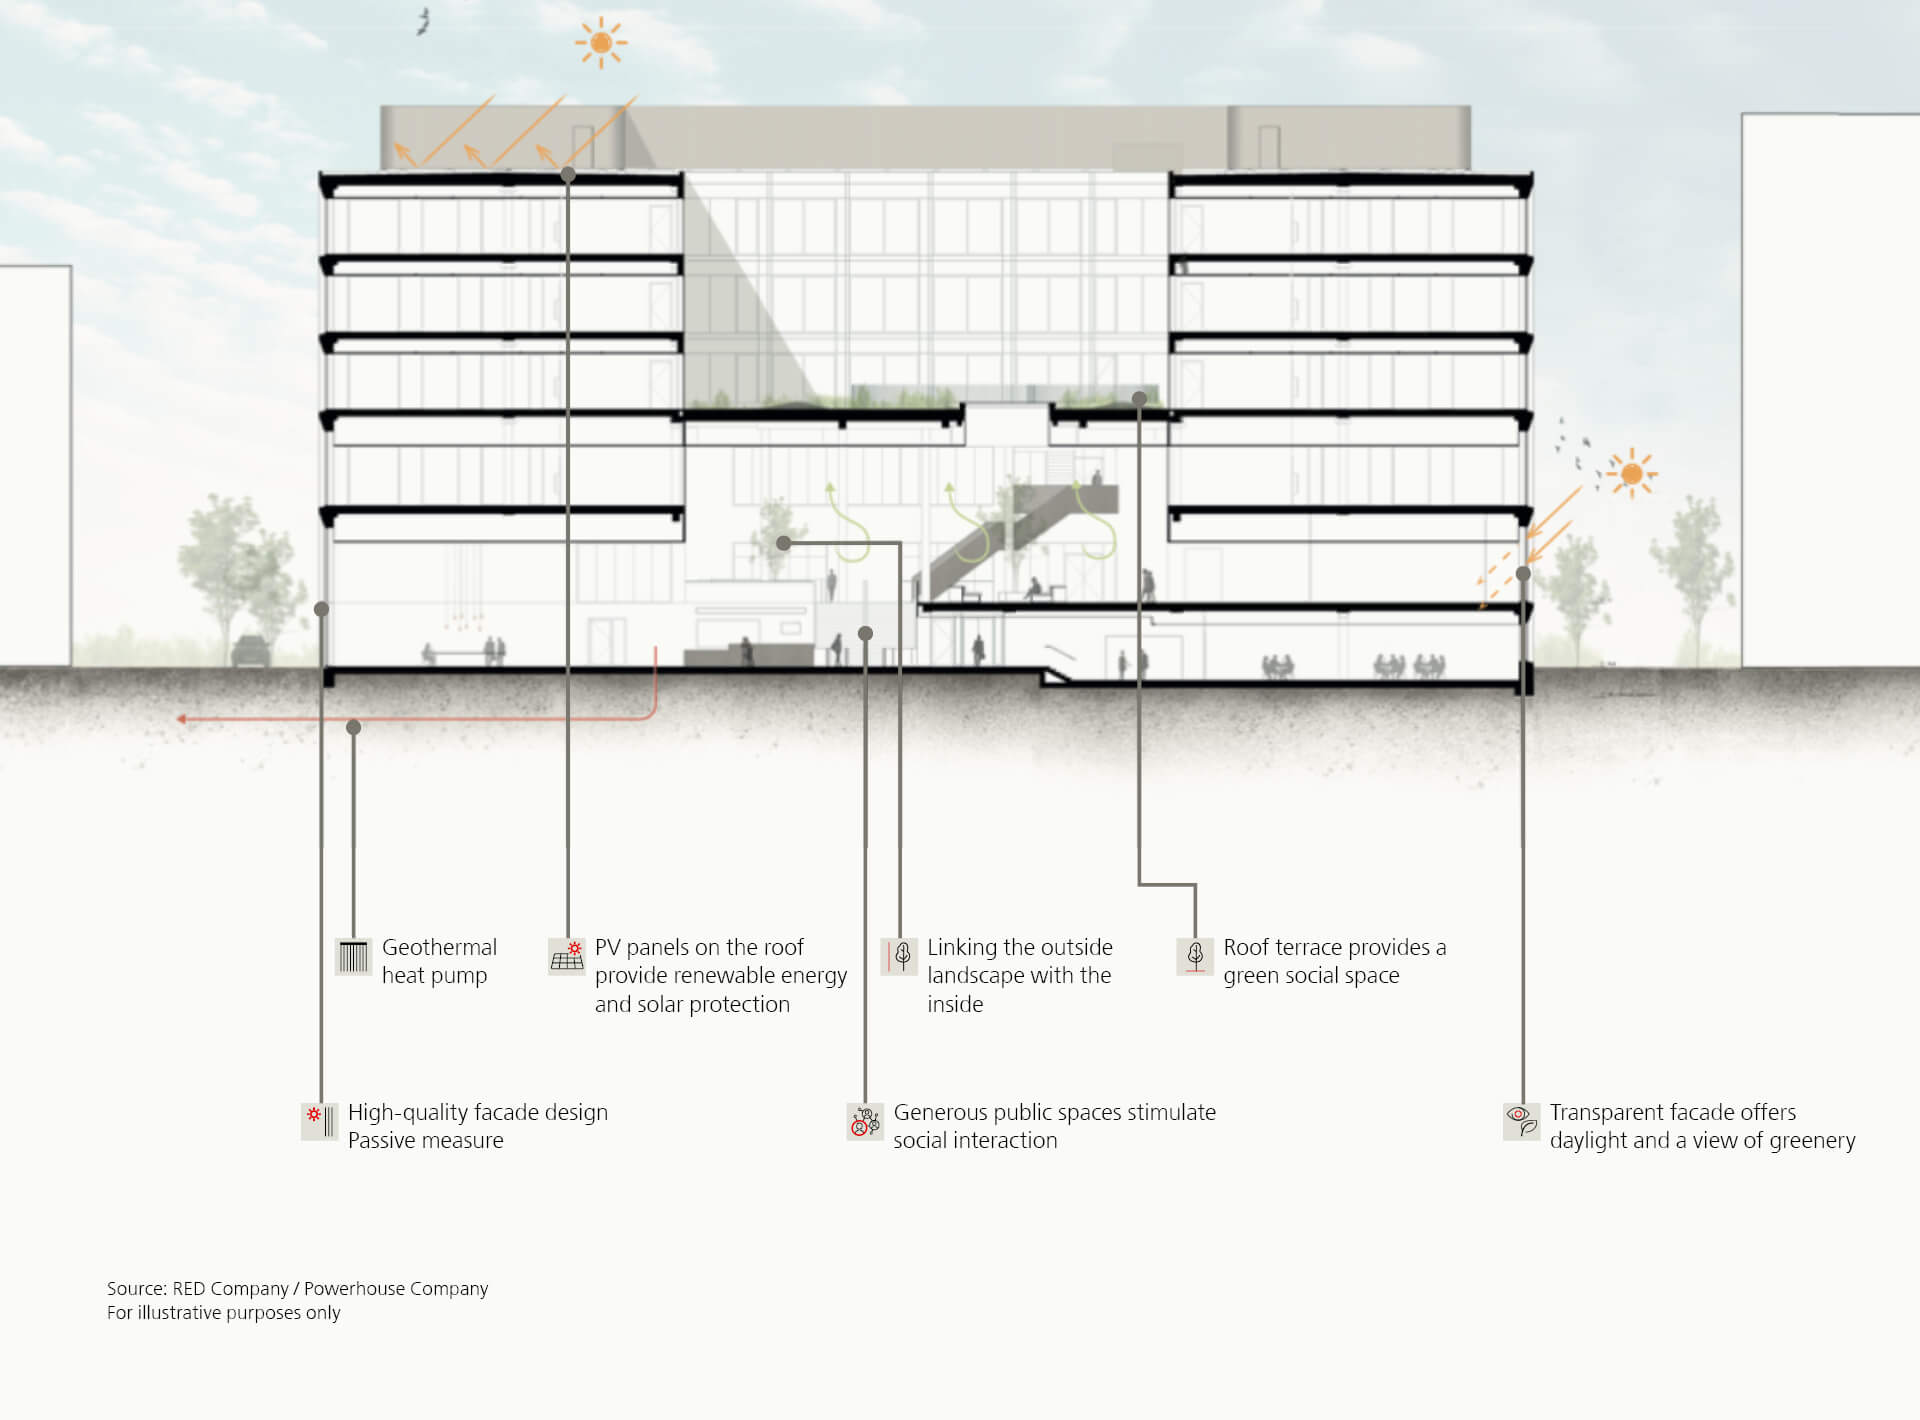 Visualization of the office building showing details of the construction work and various building components.